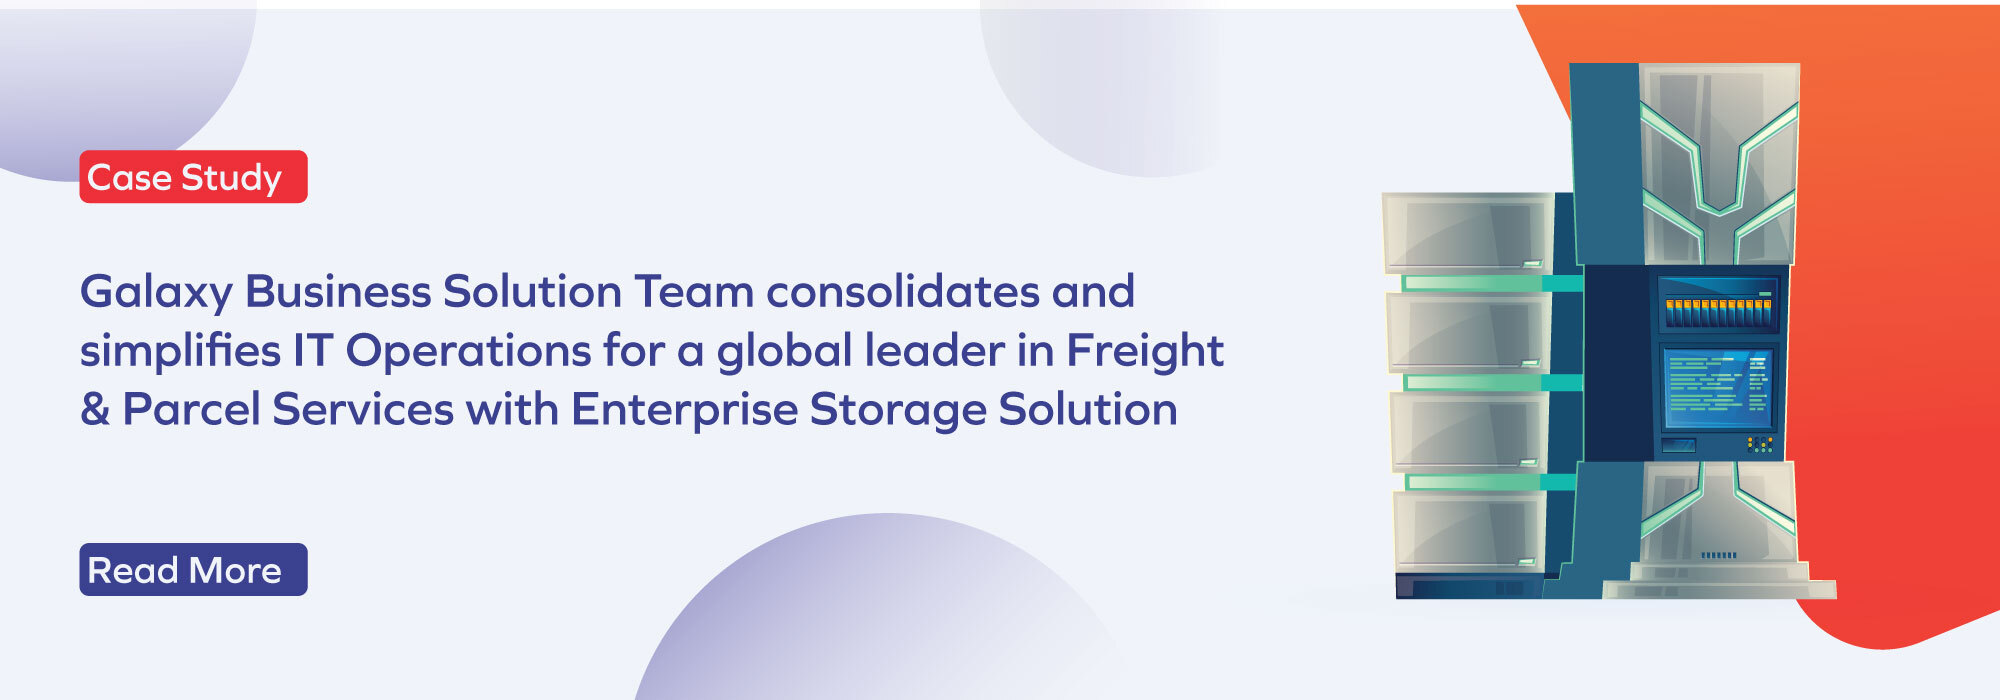 Freight & Parcel Services simplified their IT operations by implementing Enterprise Storage Solution